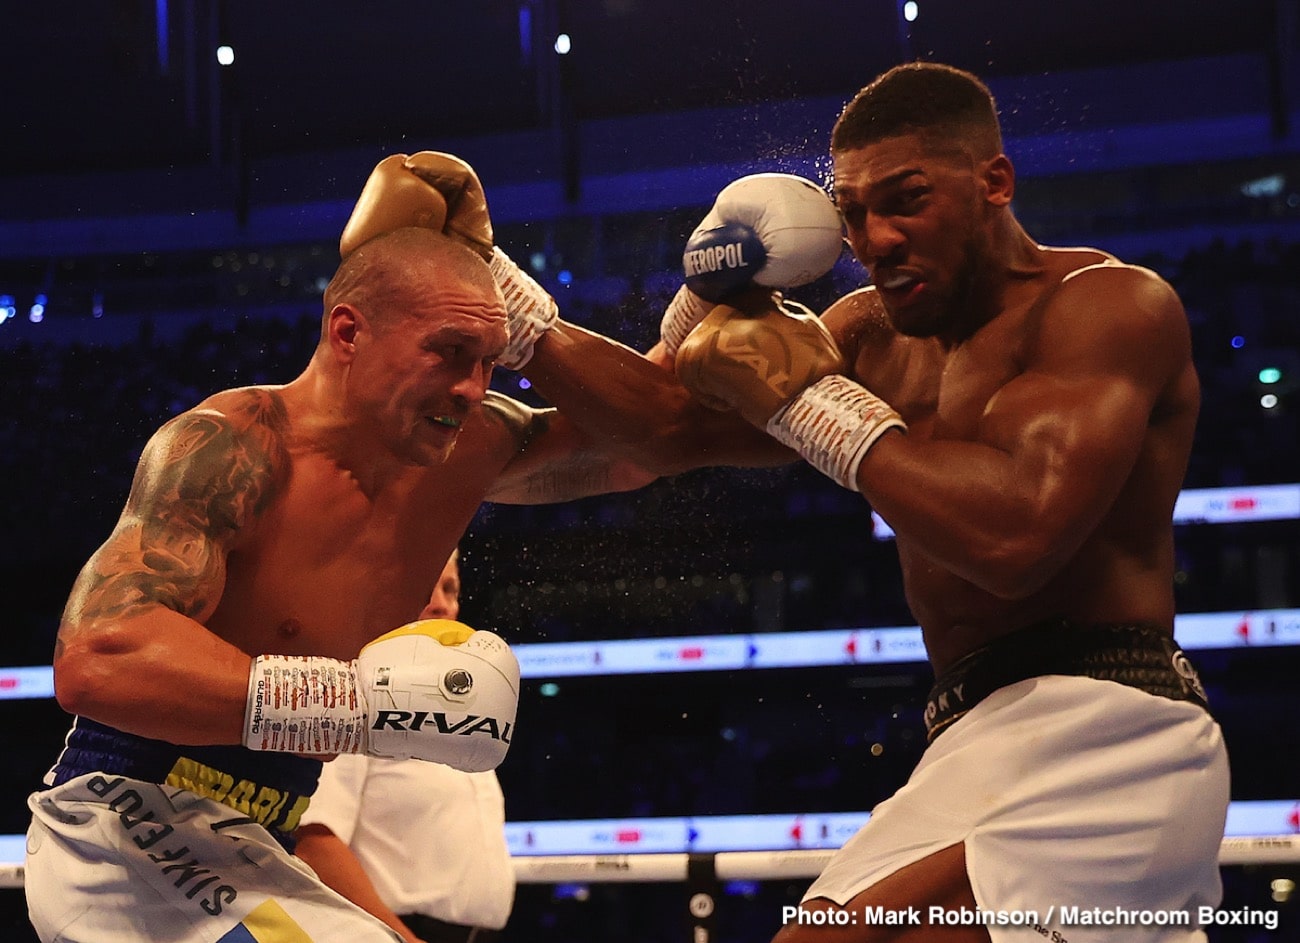 With Usyk Fighting A Far Bigger Fight, Rematch With Joshua Likely To Be Delayed; AJ May Take Interim Fight